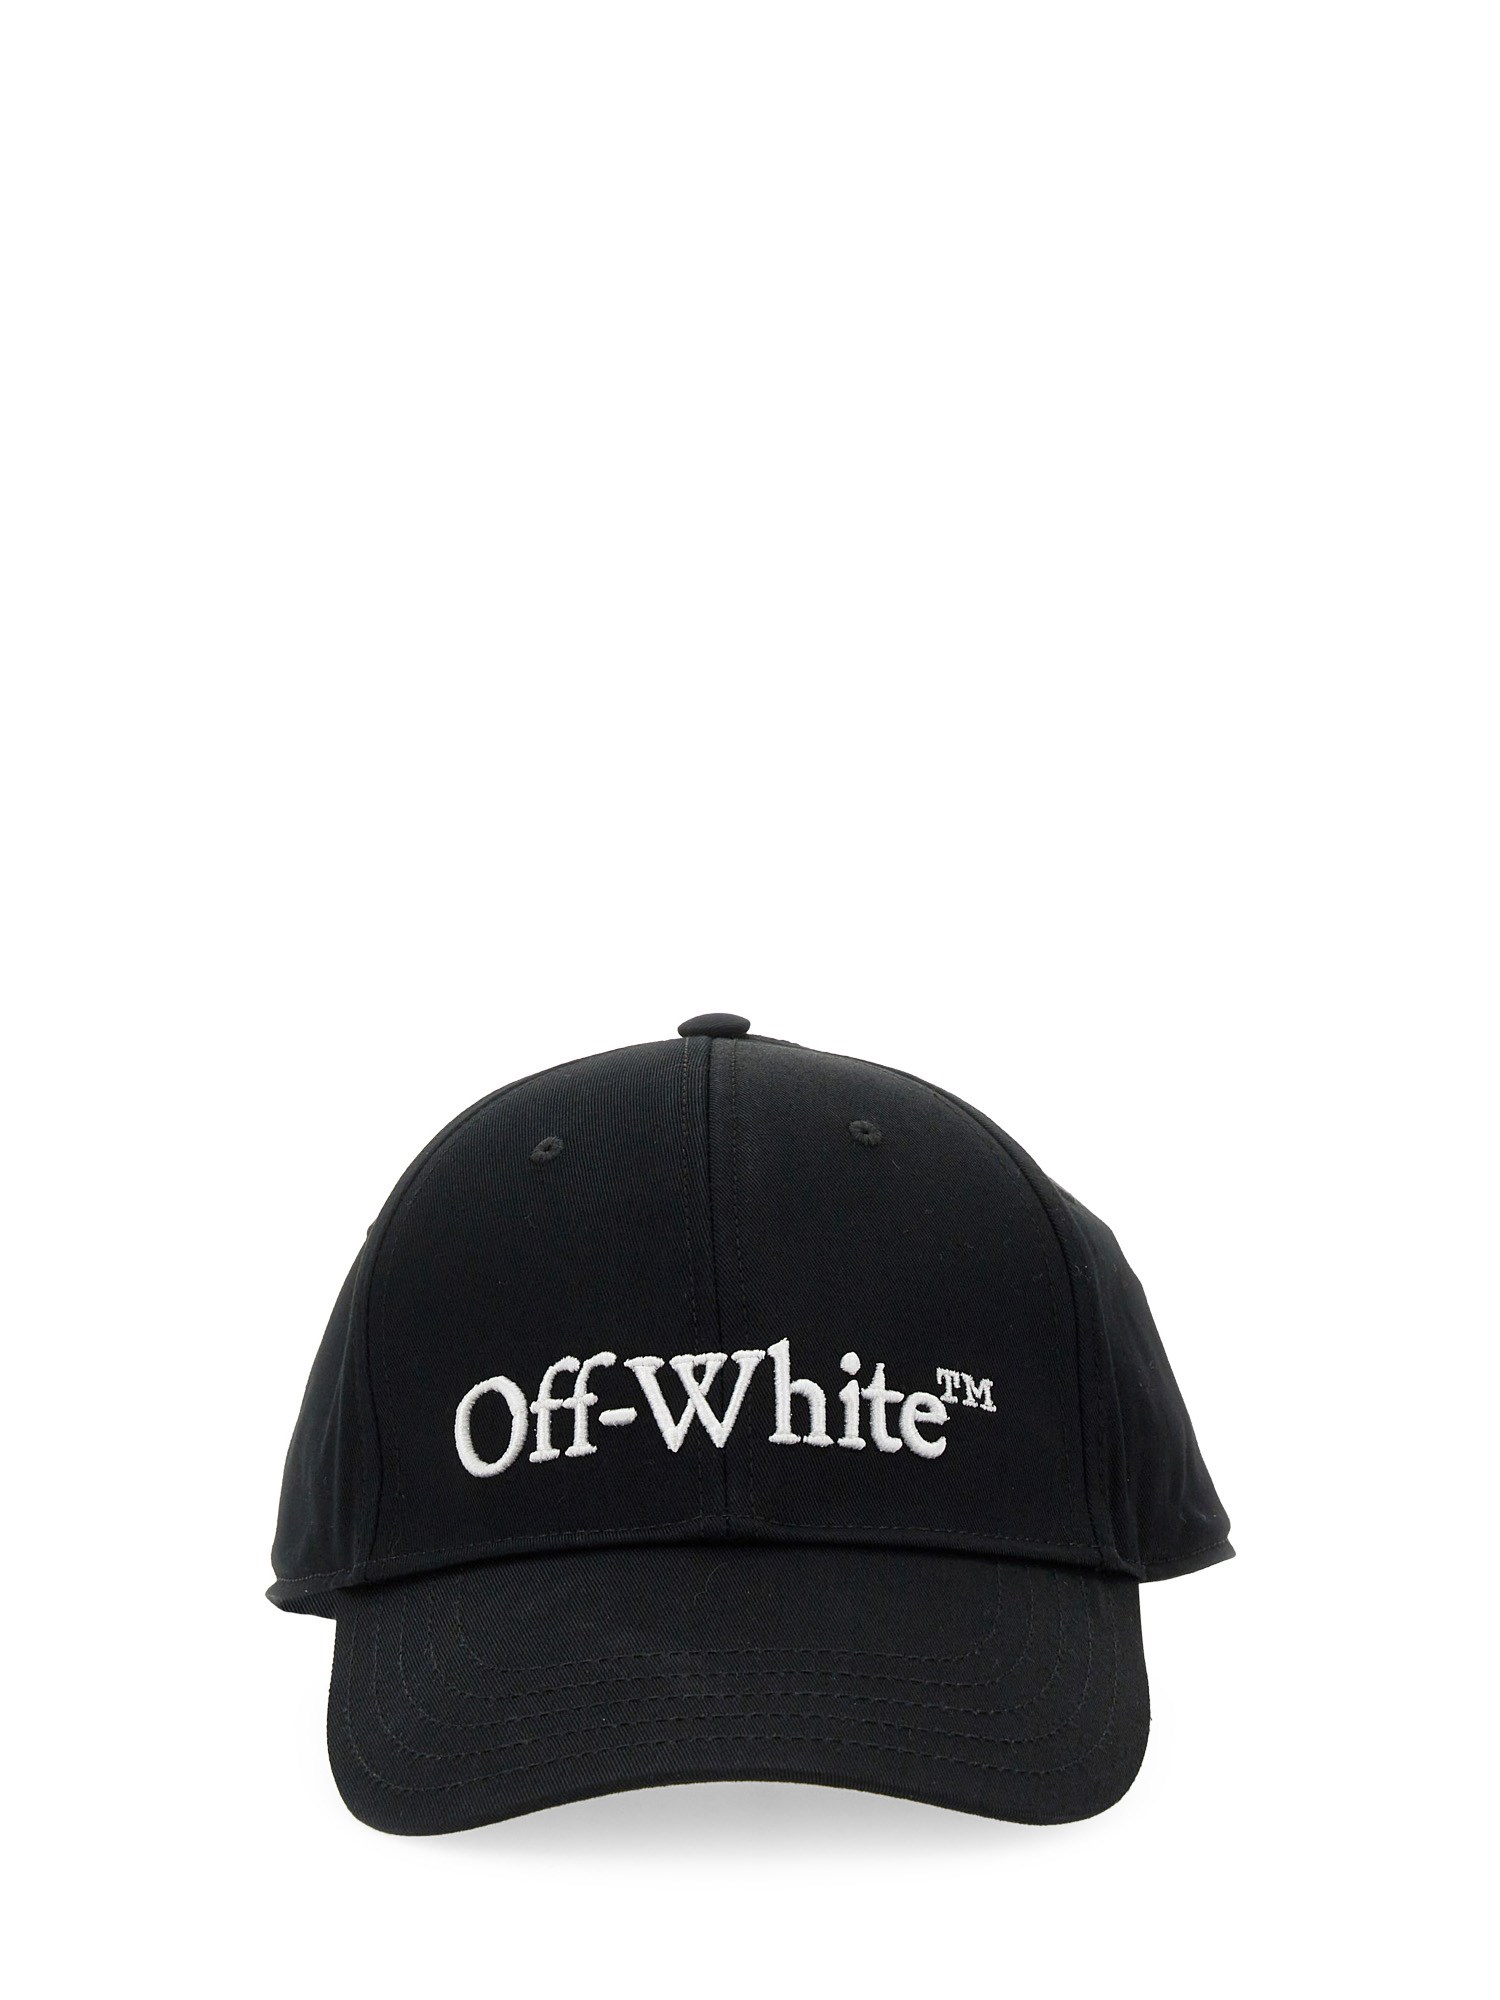 off-white hat with logo